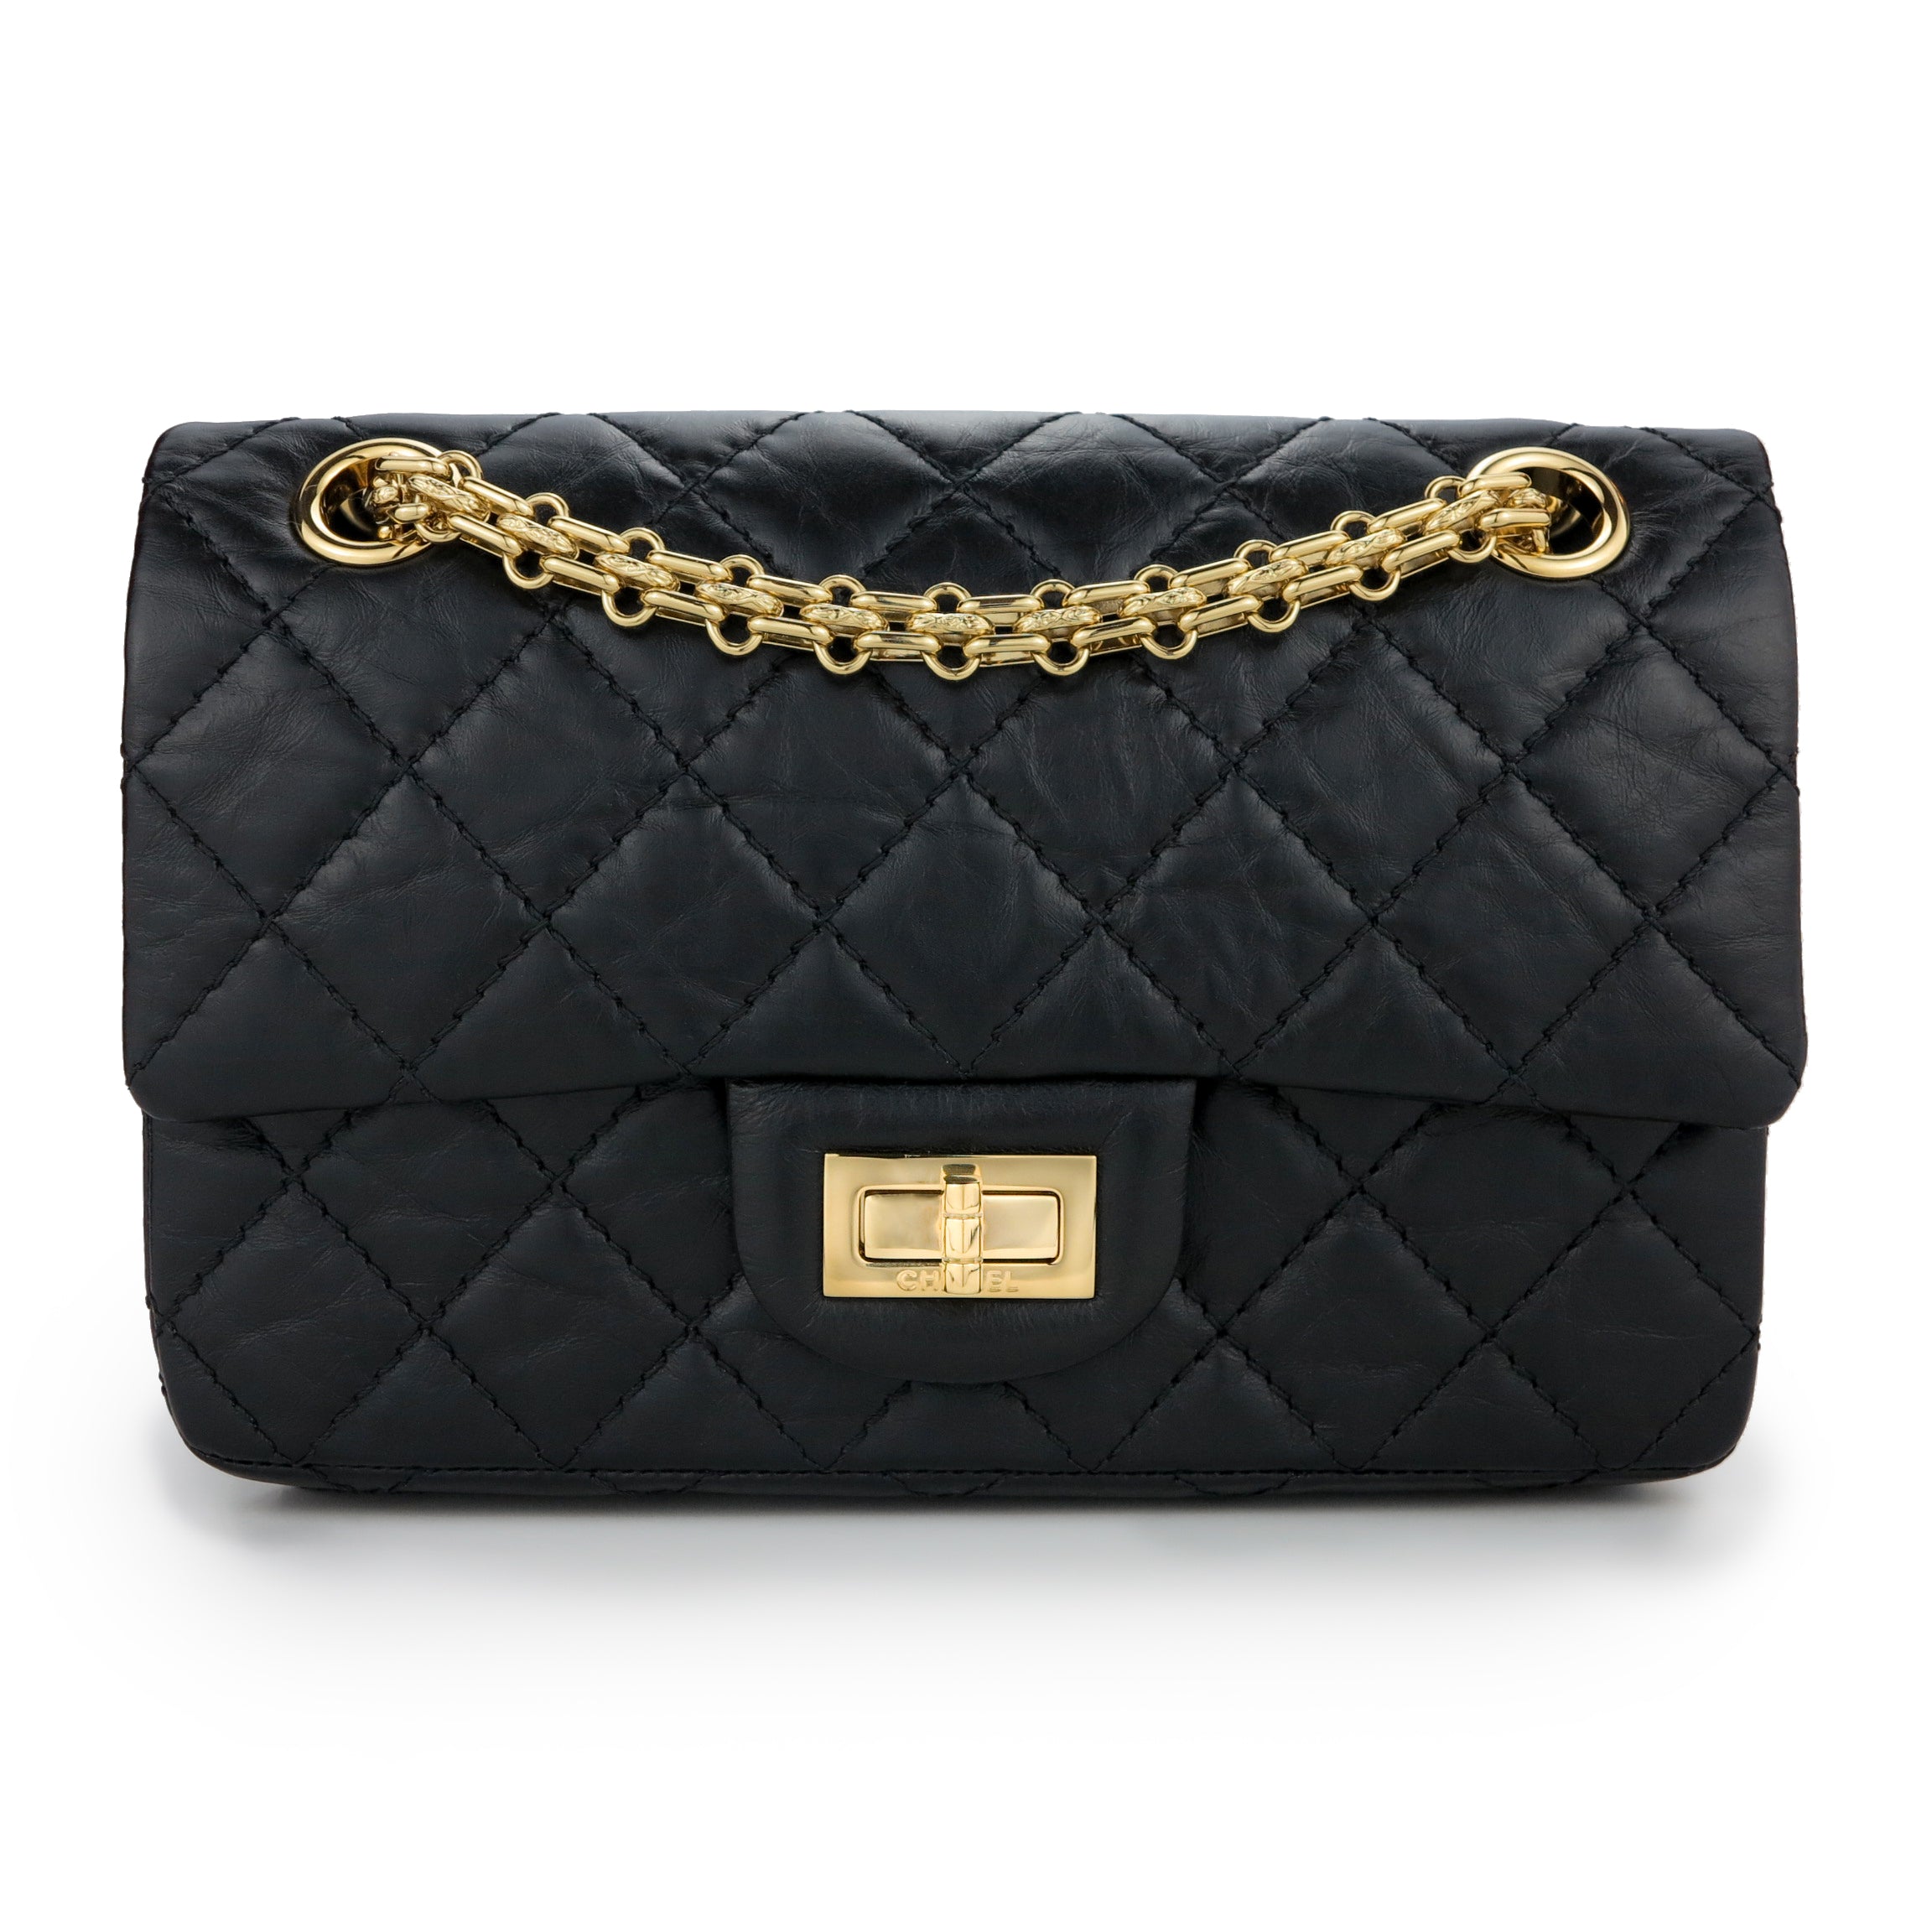 Chanel Resale Prices Have Skyrocketed: An Investigative Report - PurseBop